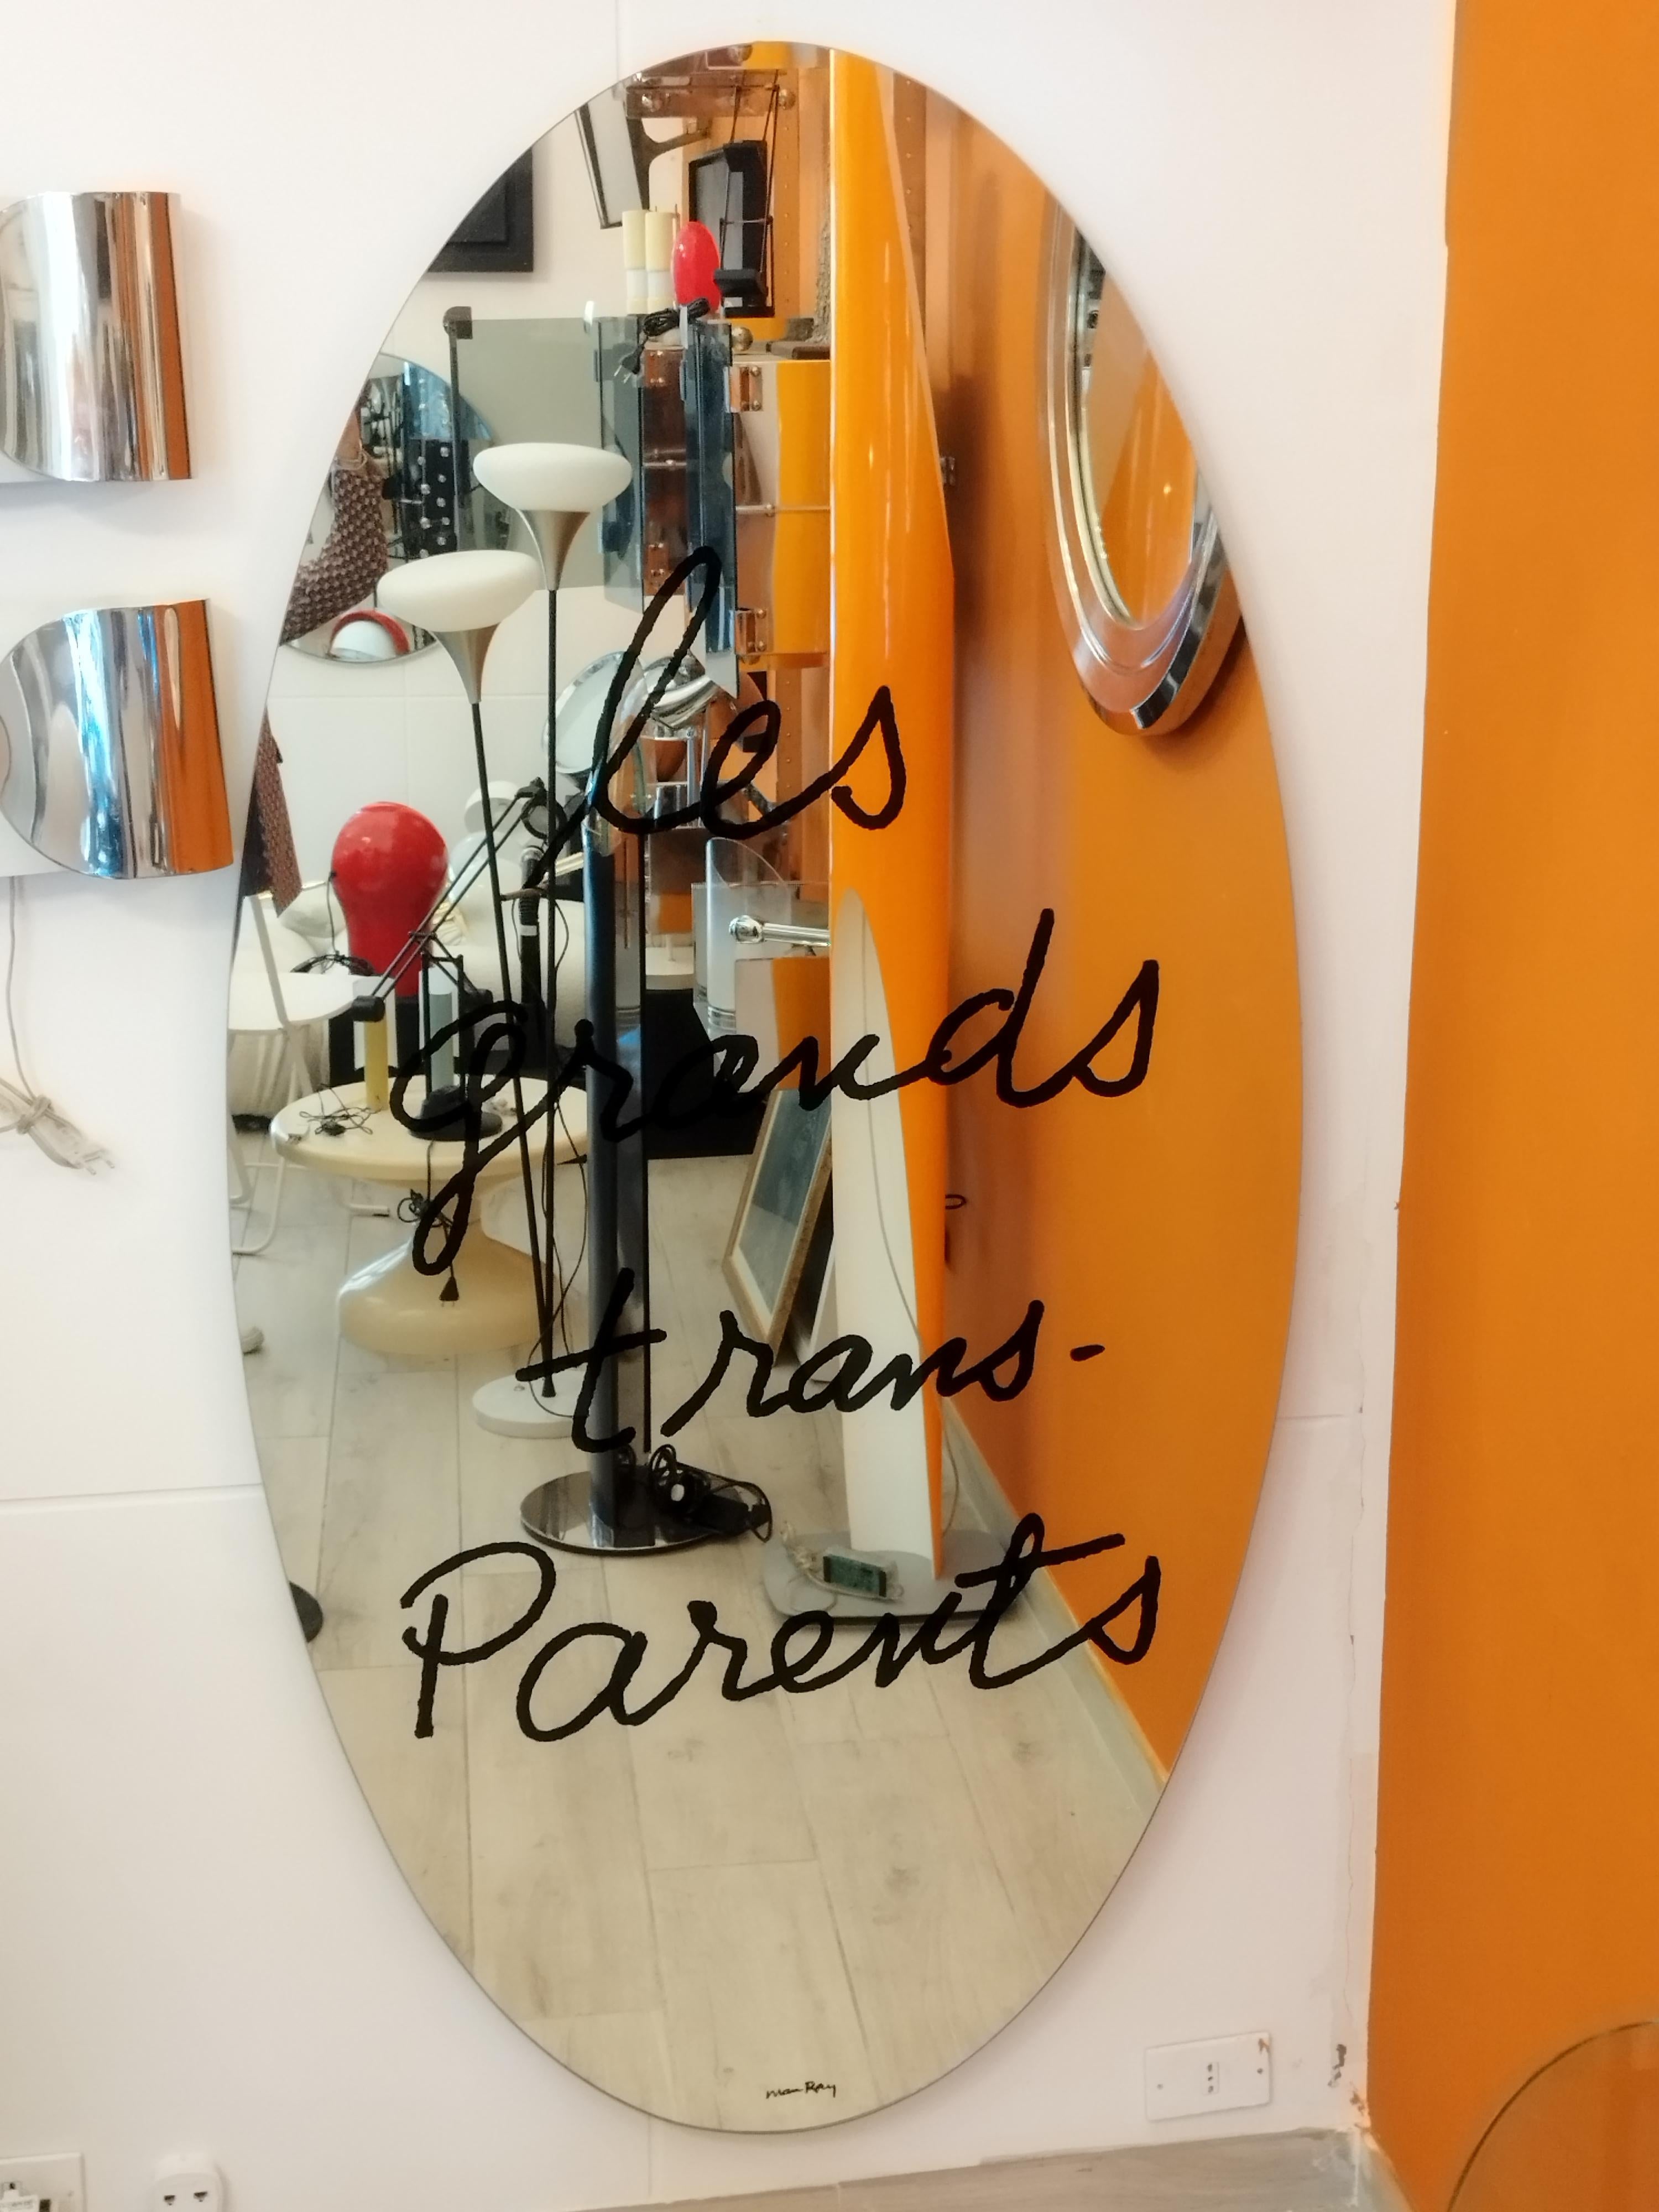 Designed in 1938 by Man Ray. This elliptical mirror is serigraphed with “les grands trans-Parents.” A play on words written by Man Ray on a mirror, a poetical proposal for the home. This mirror was originally made for Simon Gavina in 1971 and is